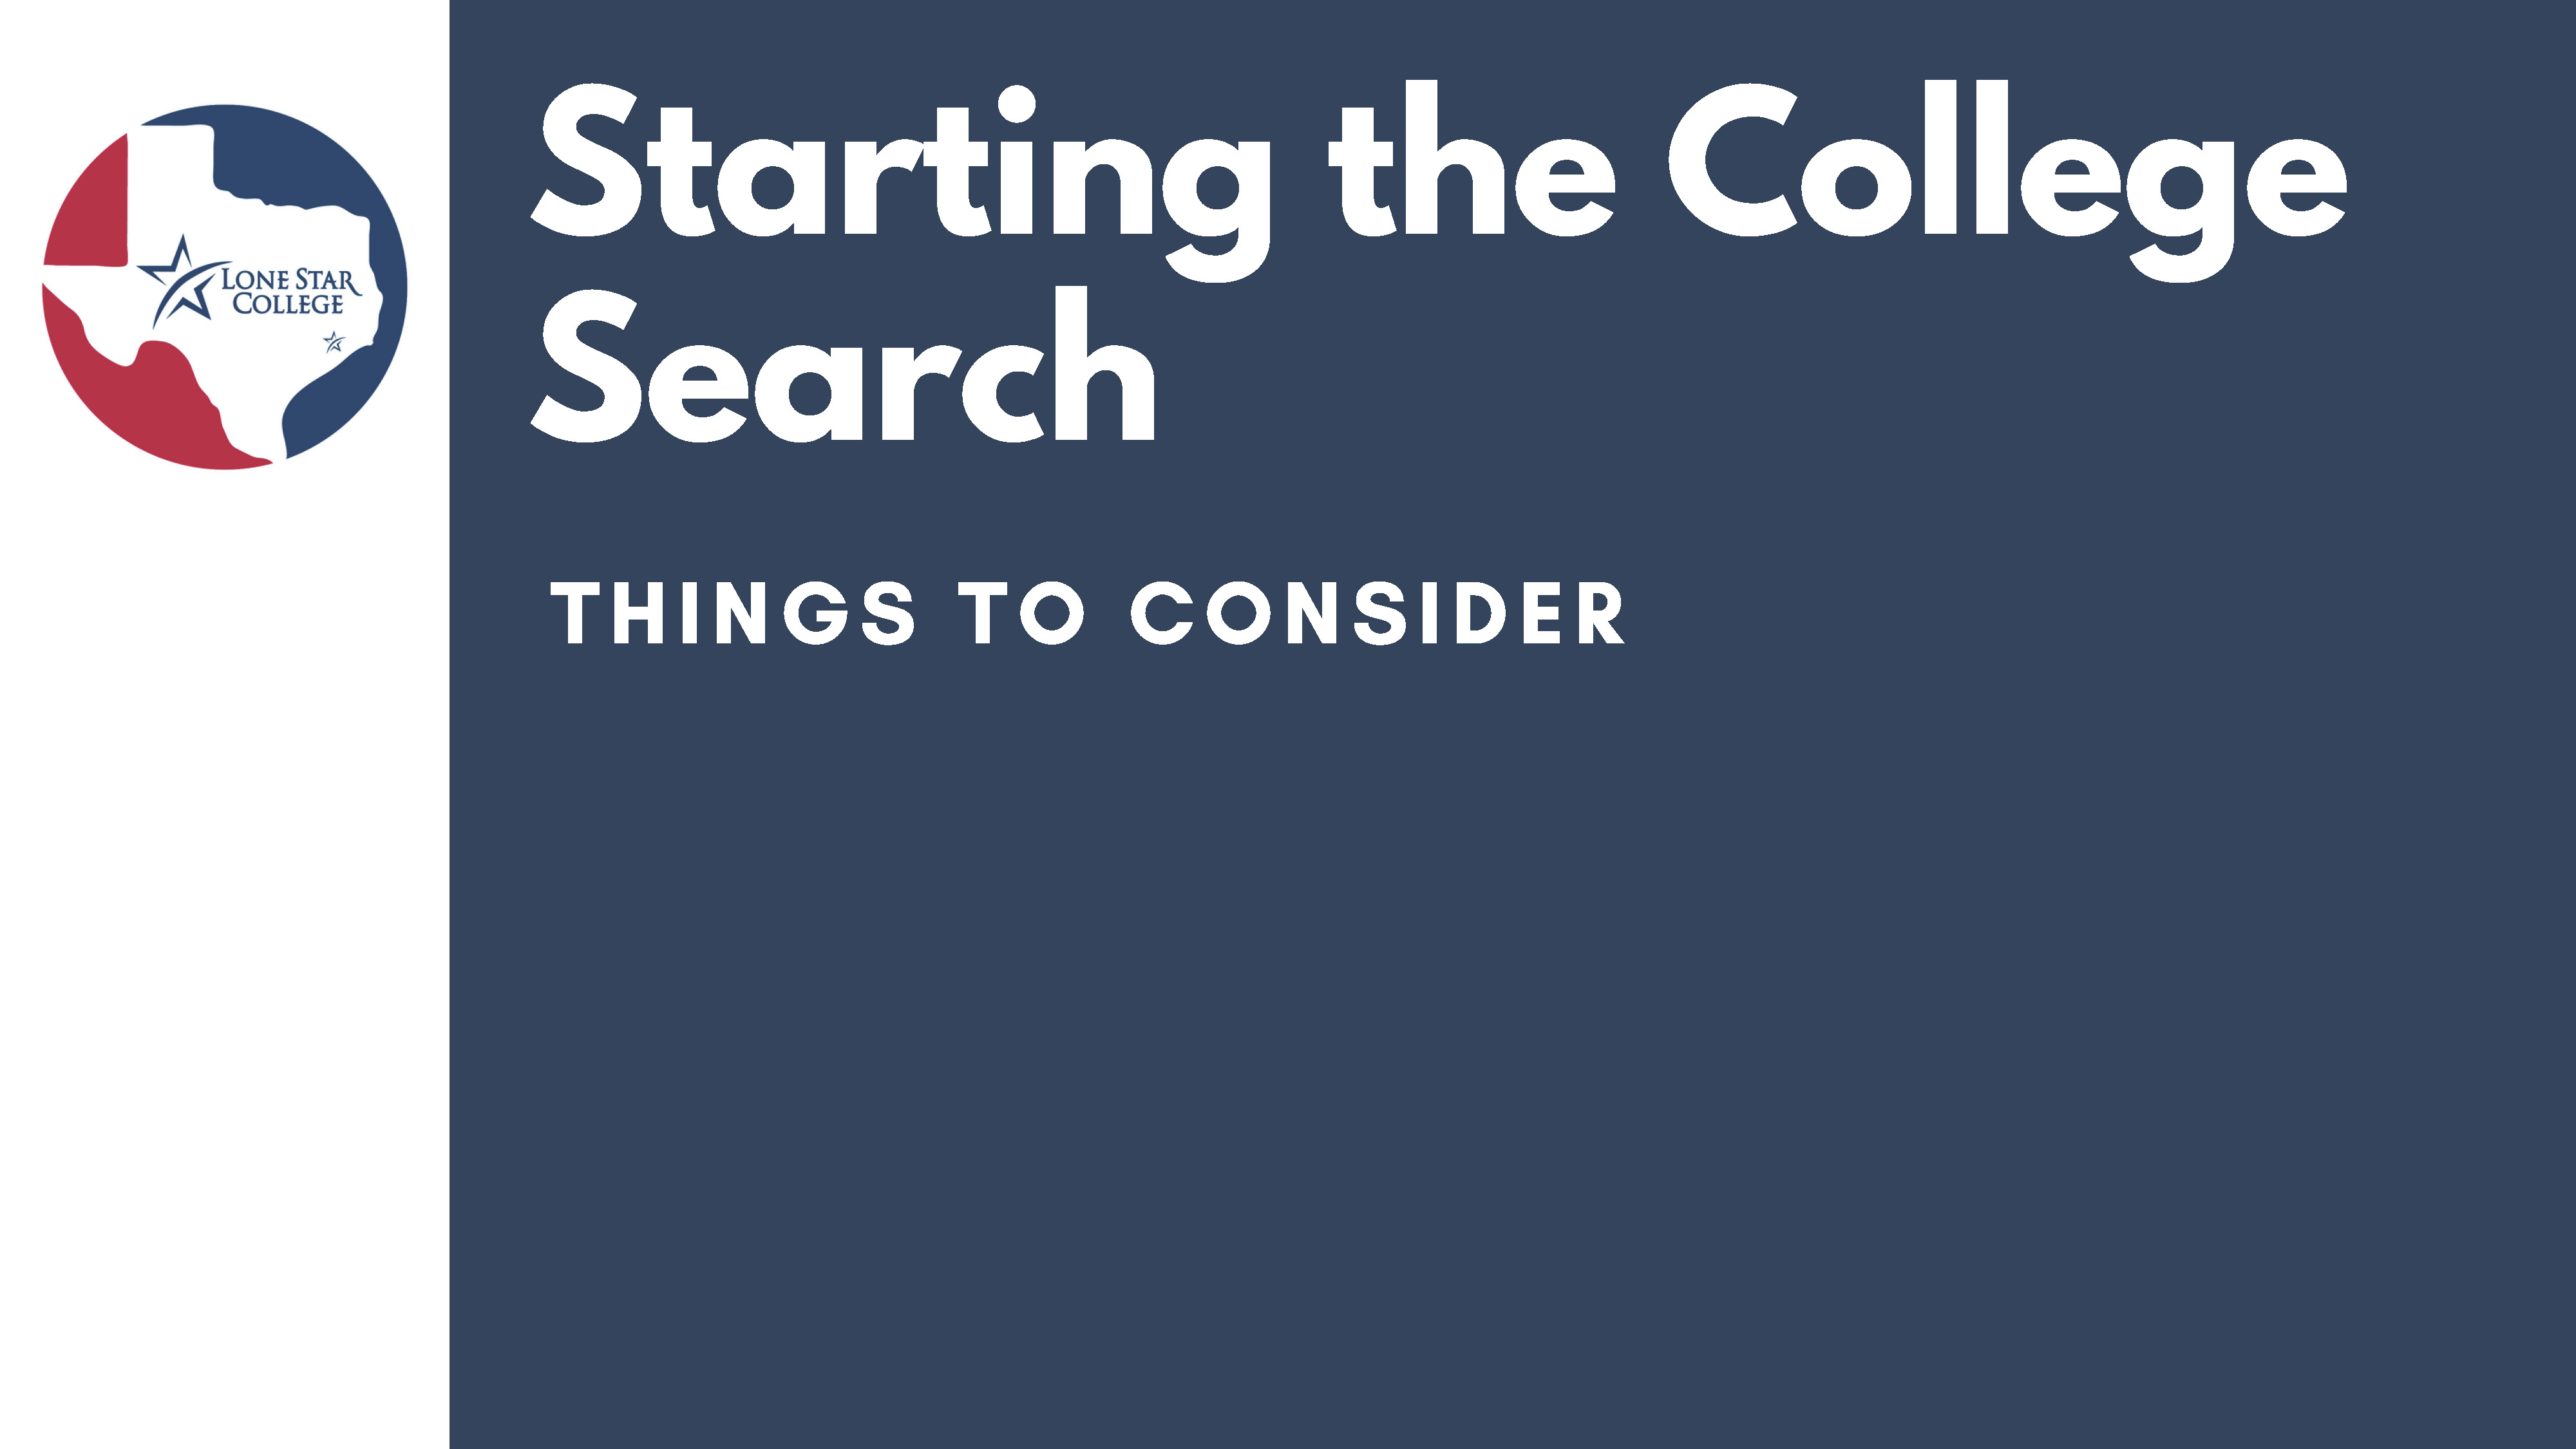 Starting the College Search: Things to Consider